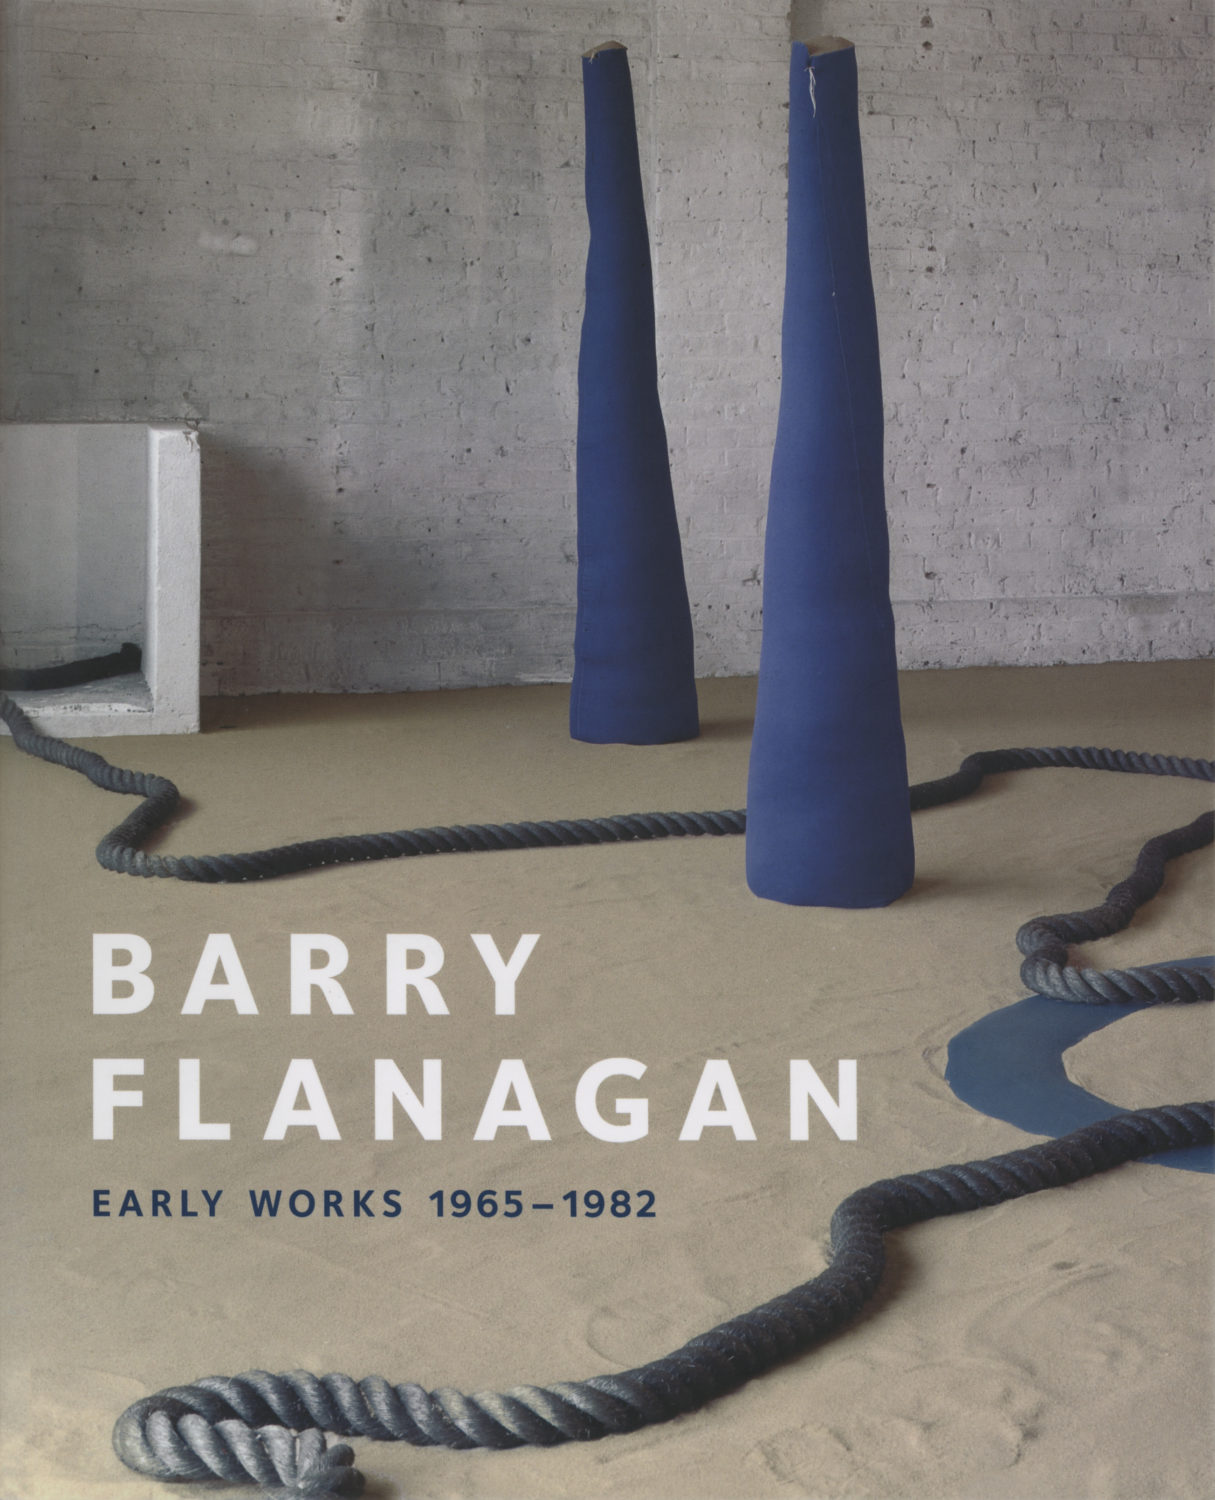 Barry Flanagan: Early Works 1965-1982